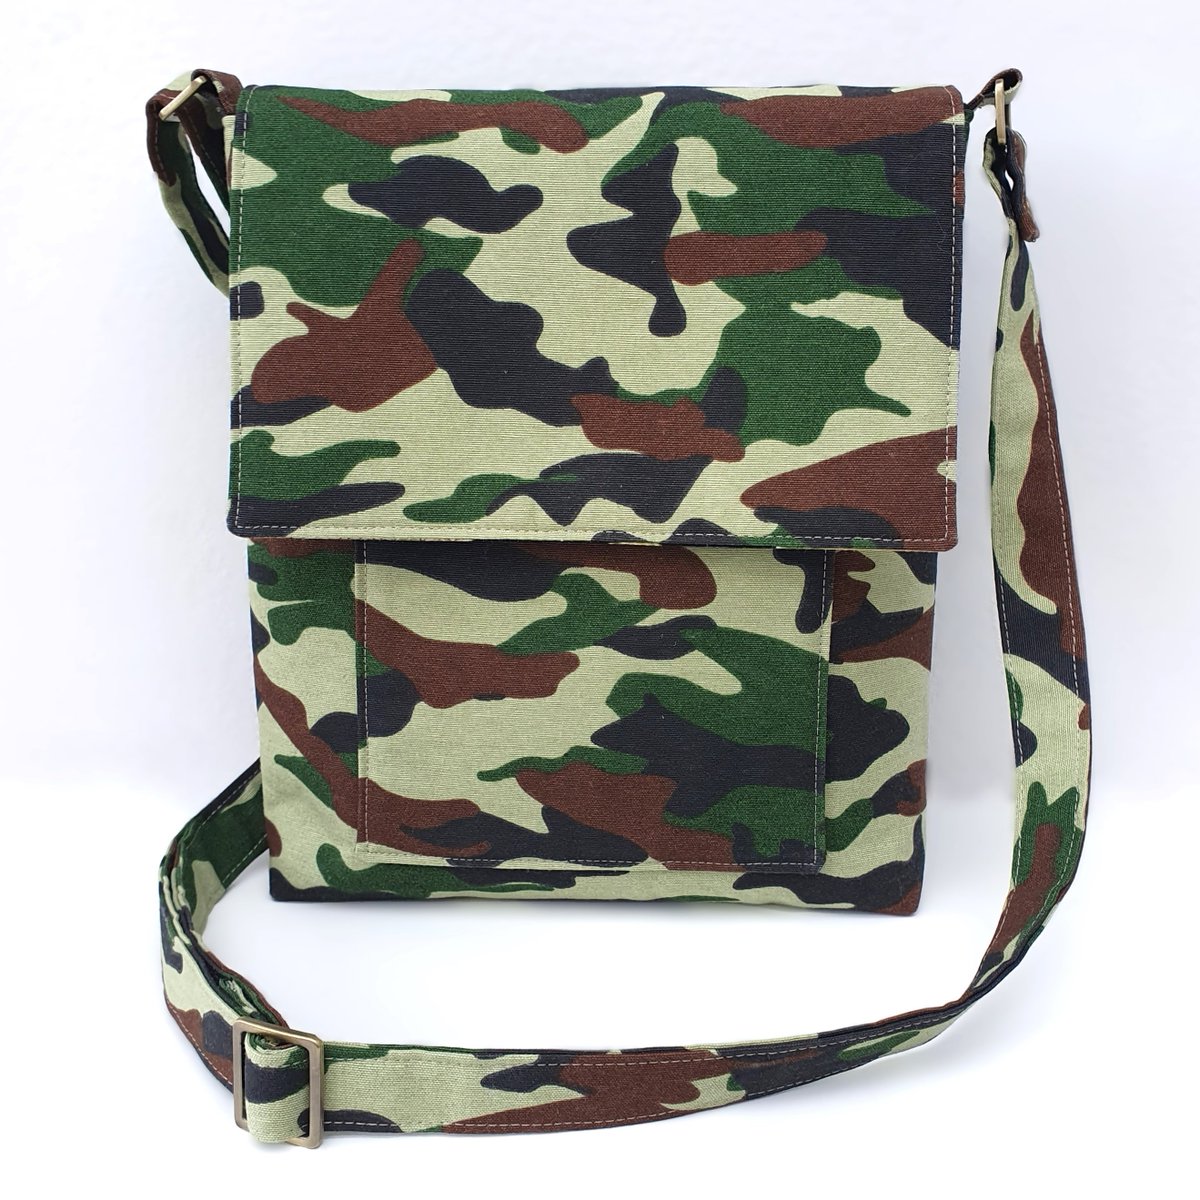 #MHHSBD 𝗣𝗲𝗿𝗳𝗲𝗰𝘁 𝗳𝗼𝗿 𝗙𝗮𝘁𝗵𝗲𝗿'𝘀 𝗗𝗮𝘆 A rather unique crossbody bag that would be fabulous to take on a fishing trip. Loads of room inside for all your essentials and sandwiches and nobody else will have one the same! It's in my Etsy shop - link in comments🥪🐟